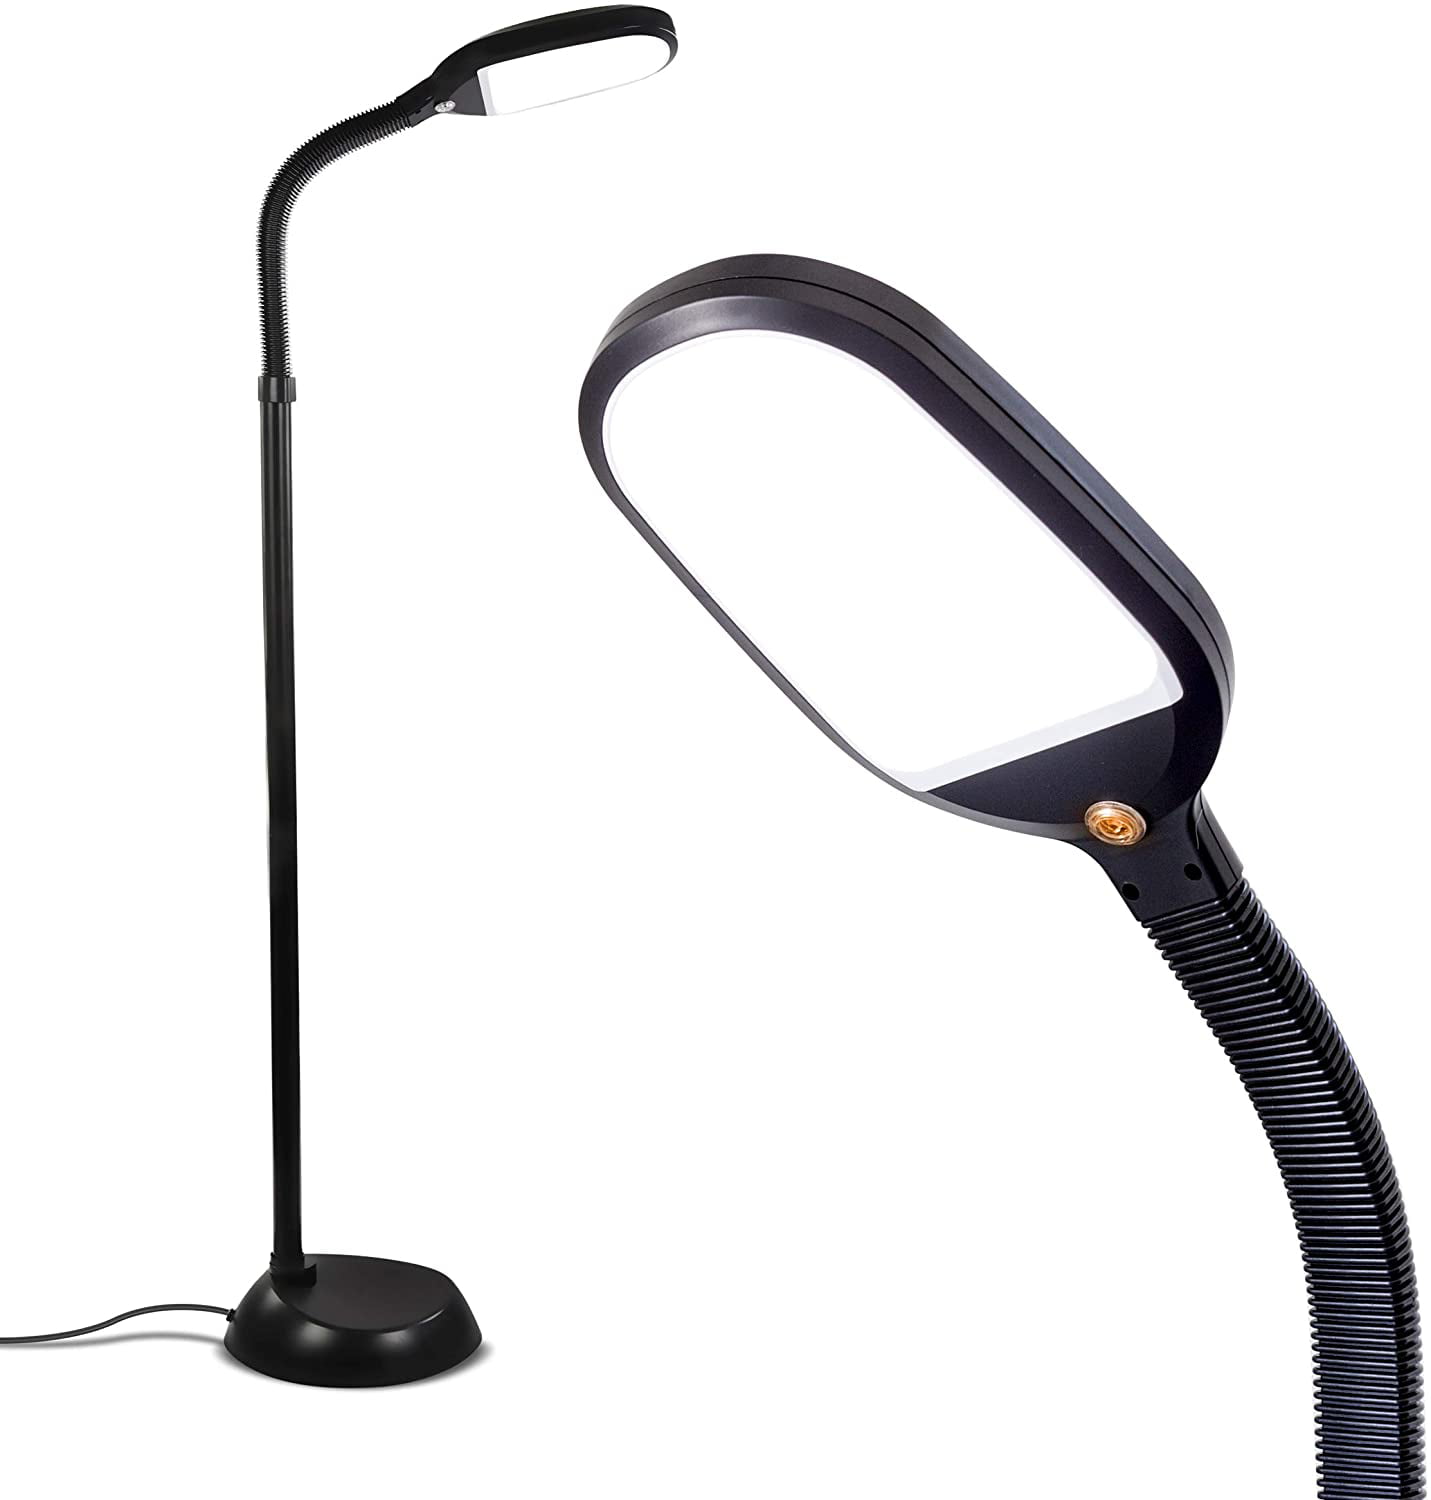 Brightech Litespan - Bright LED Floor Lamp for Crafts & Reading 